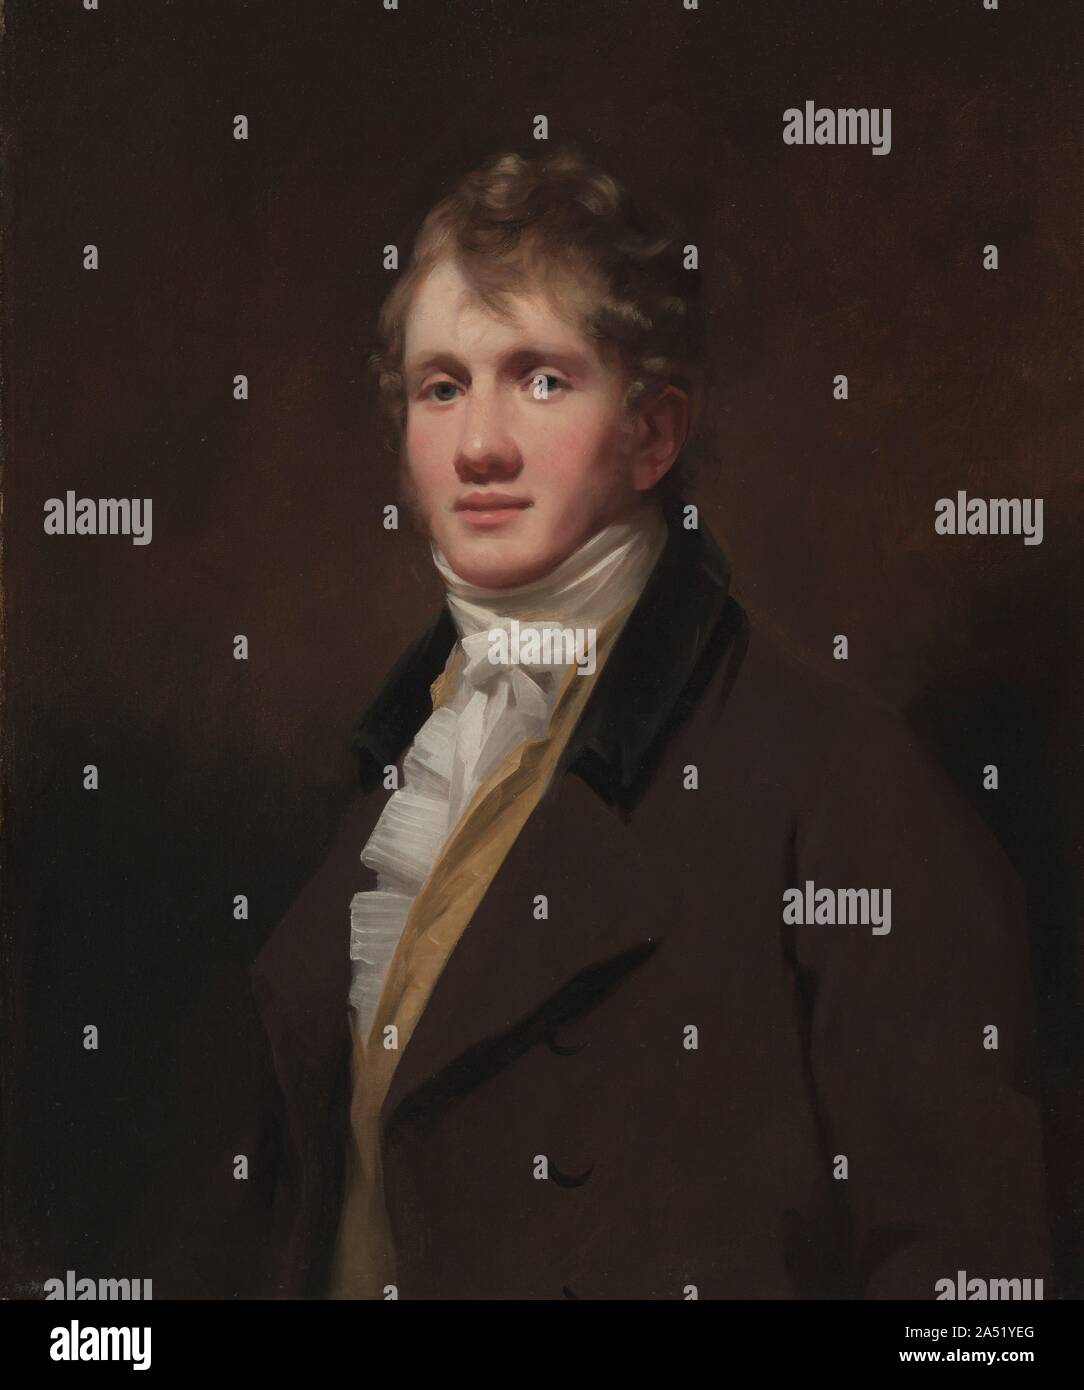 Portrait of Hugh Hope, c. 1810. Raeburn painted directly on the canvas without any preliminary drawing, often giving his works an informal, spontaneous air. Although greatly influenced by his English predecessor Joshua Reynolds, Raeburn worked in a looser style, more like the work of his younger contemporary Thomas Lawrence. Raeburn painted this portrait of Edinburgh native Hugh Hope around 1810 before Hope departed for India, where he worked as a civil servant. Stock Photo